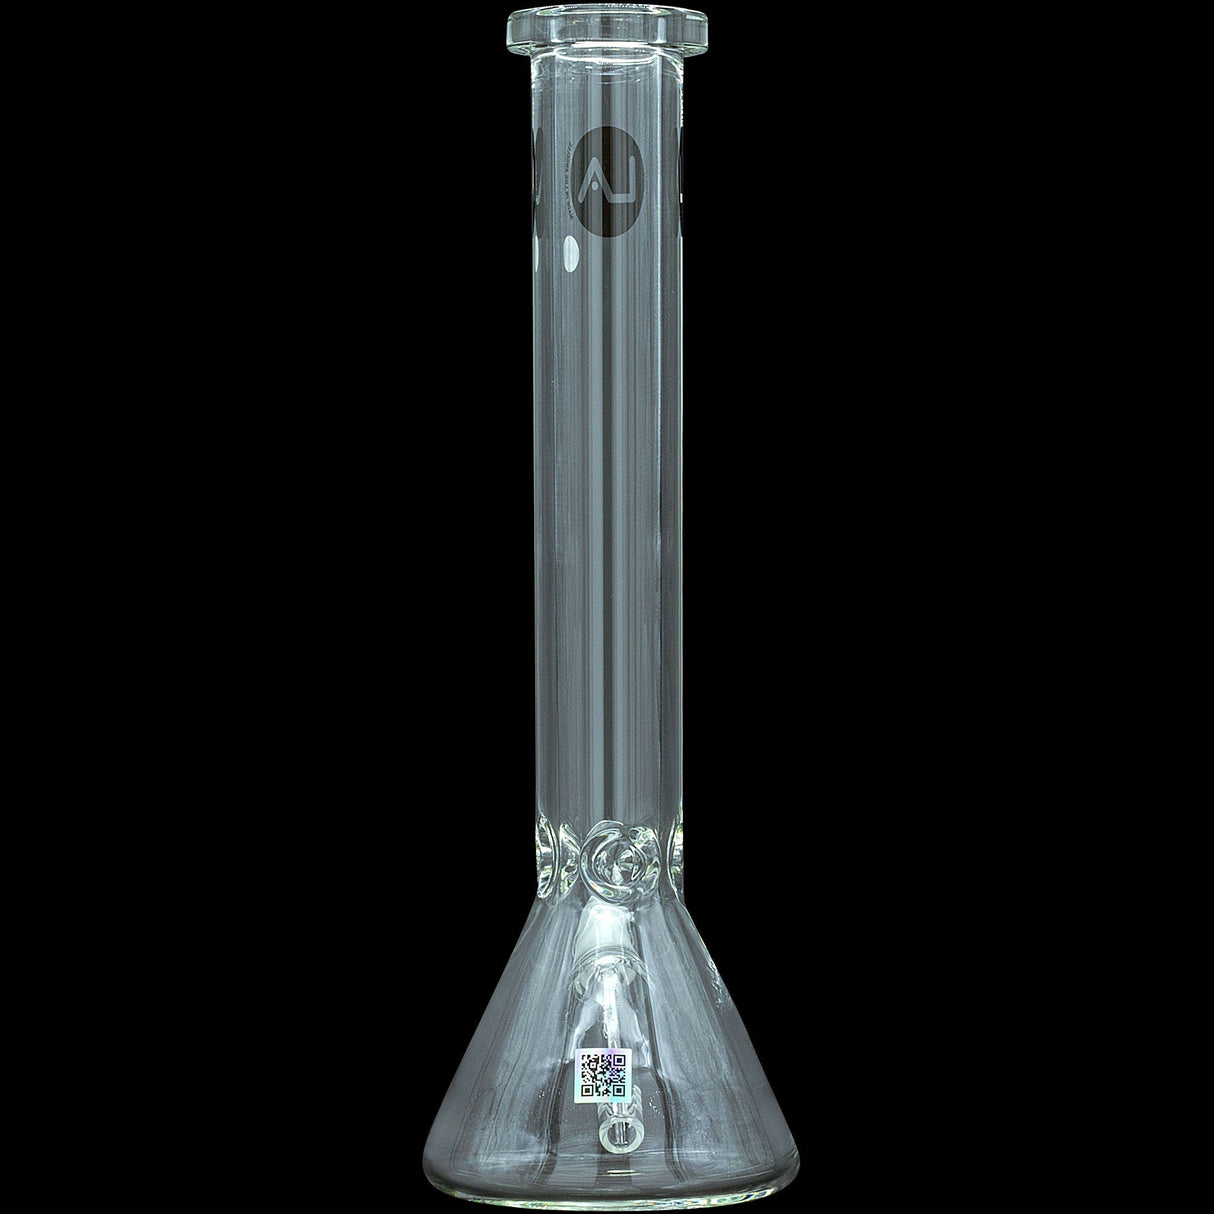 LA Pipes "Squared Up" 9mm Thick Beaker Bong, Clear Borosilicate Glass, Front View